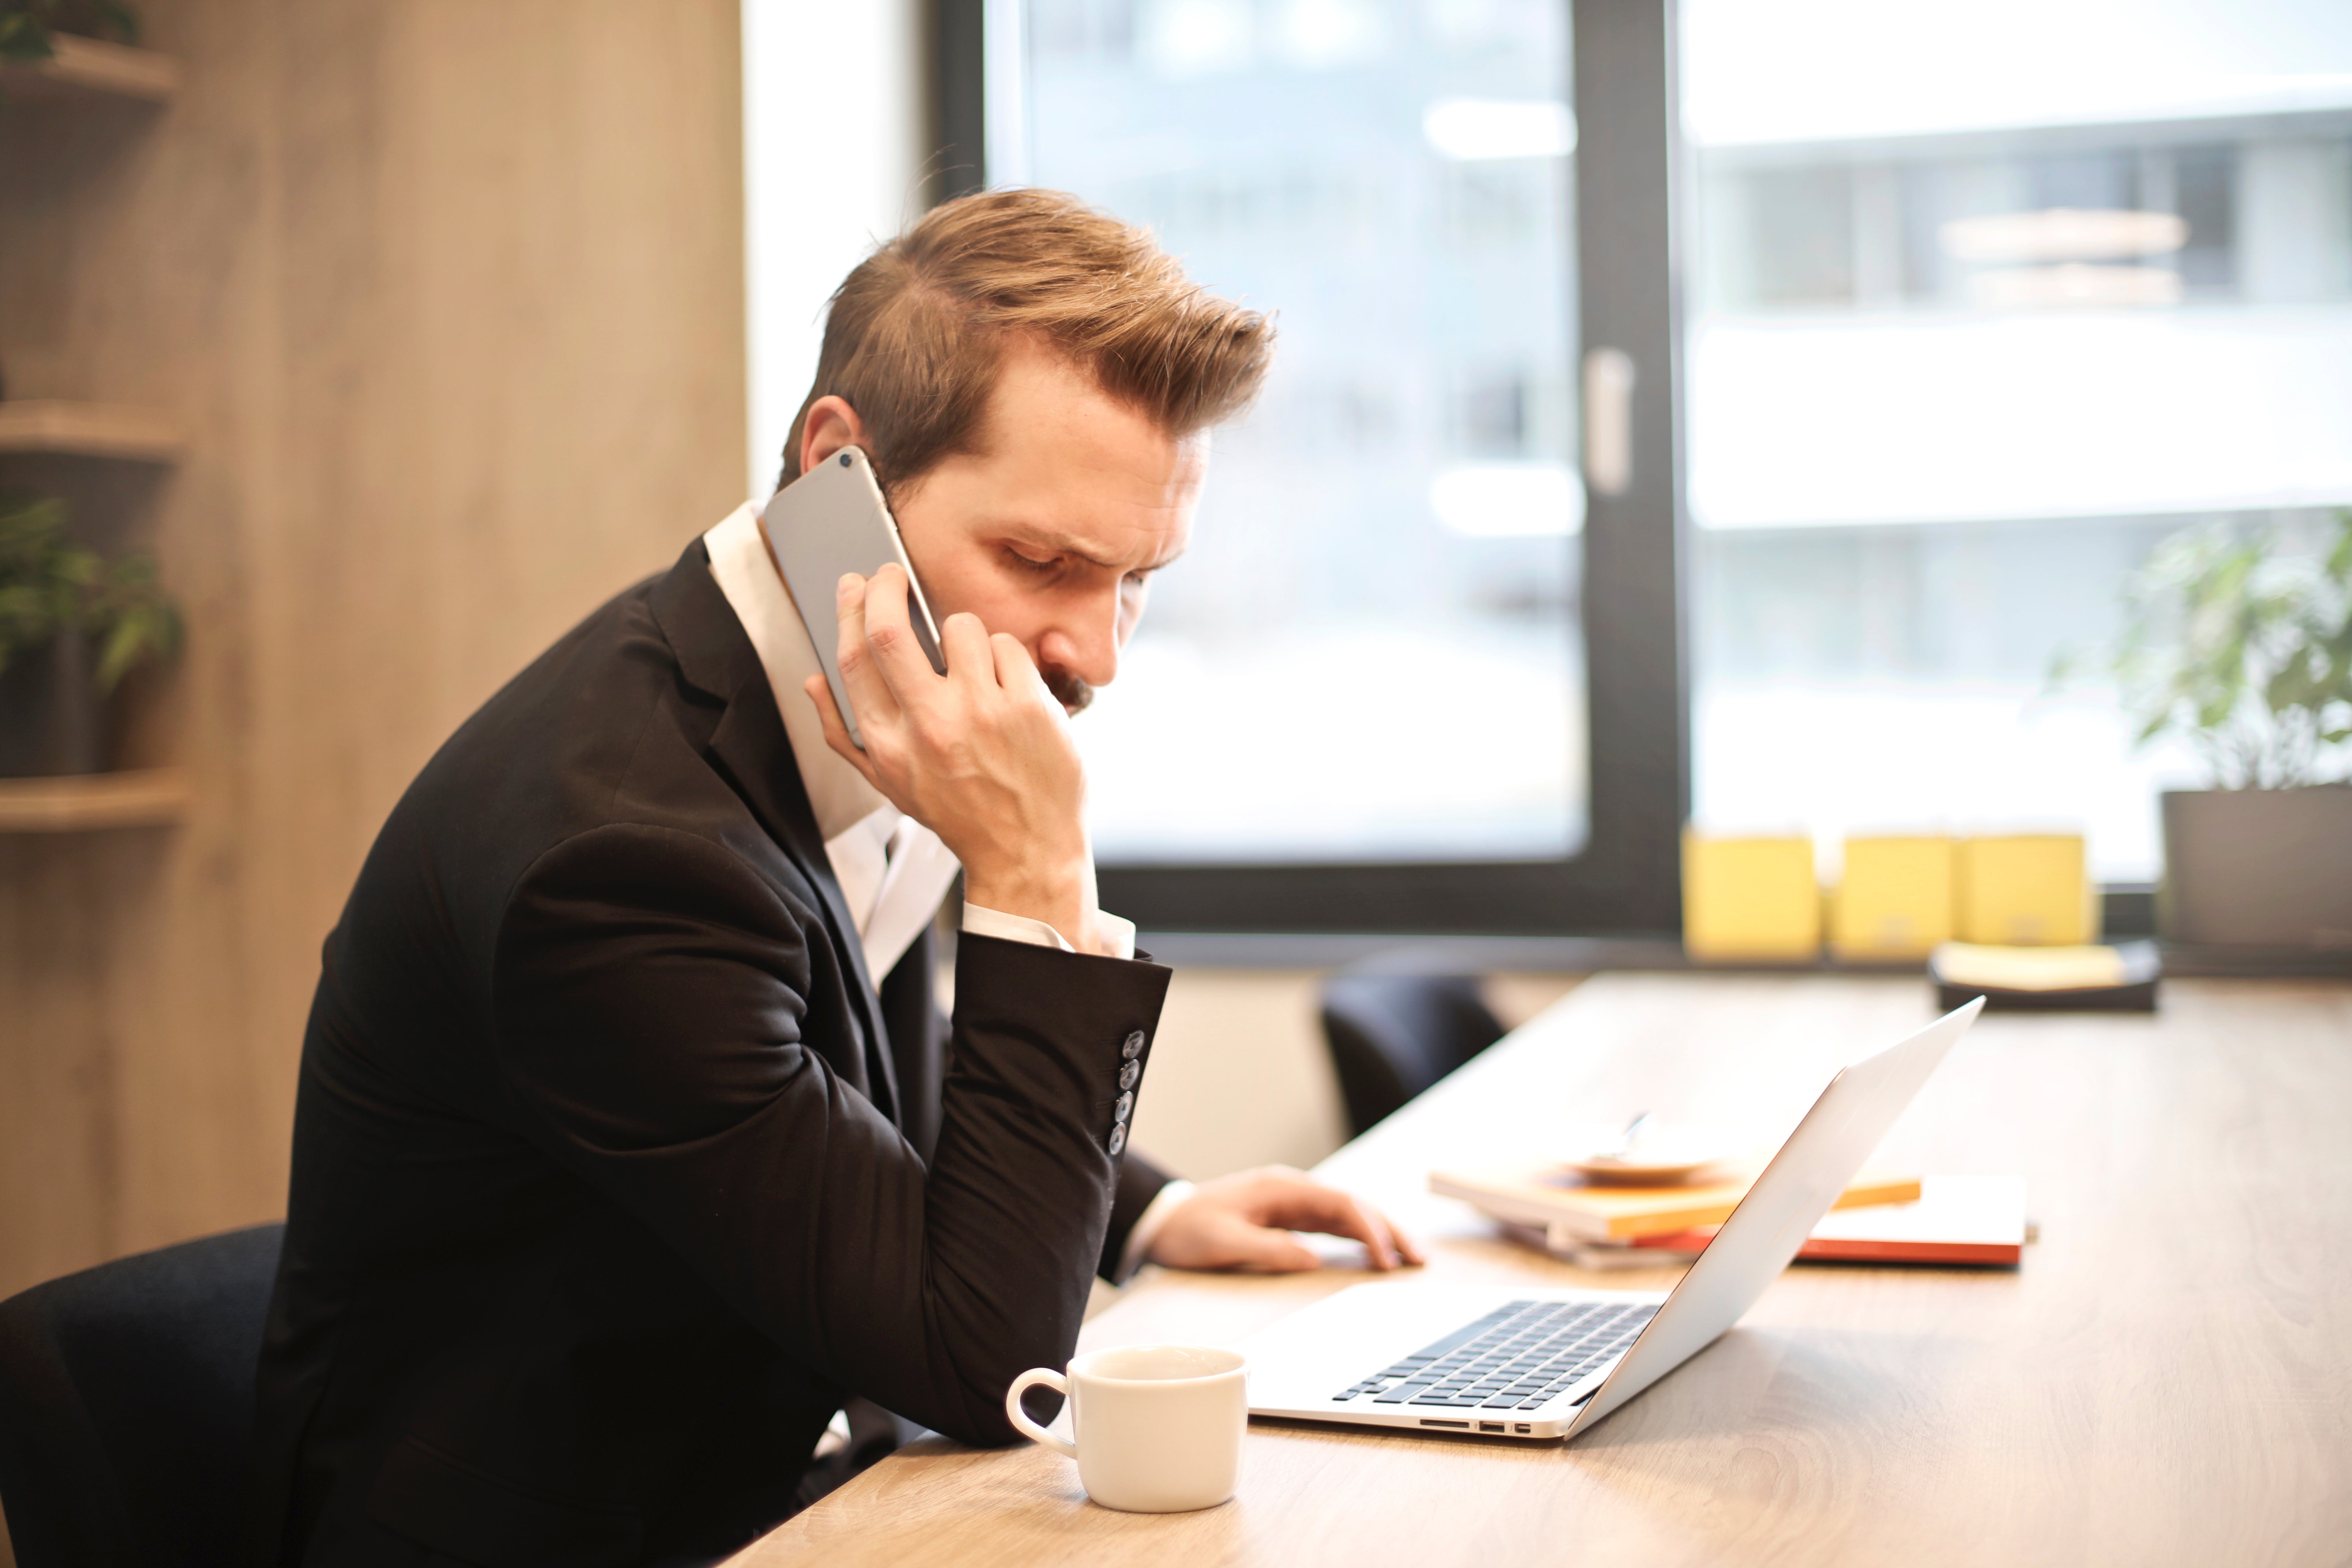 A man sitting at a desk with a laptop while looking displeased while on a call | Source: Pexels